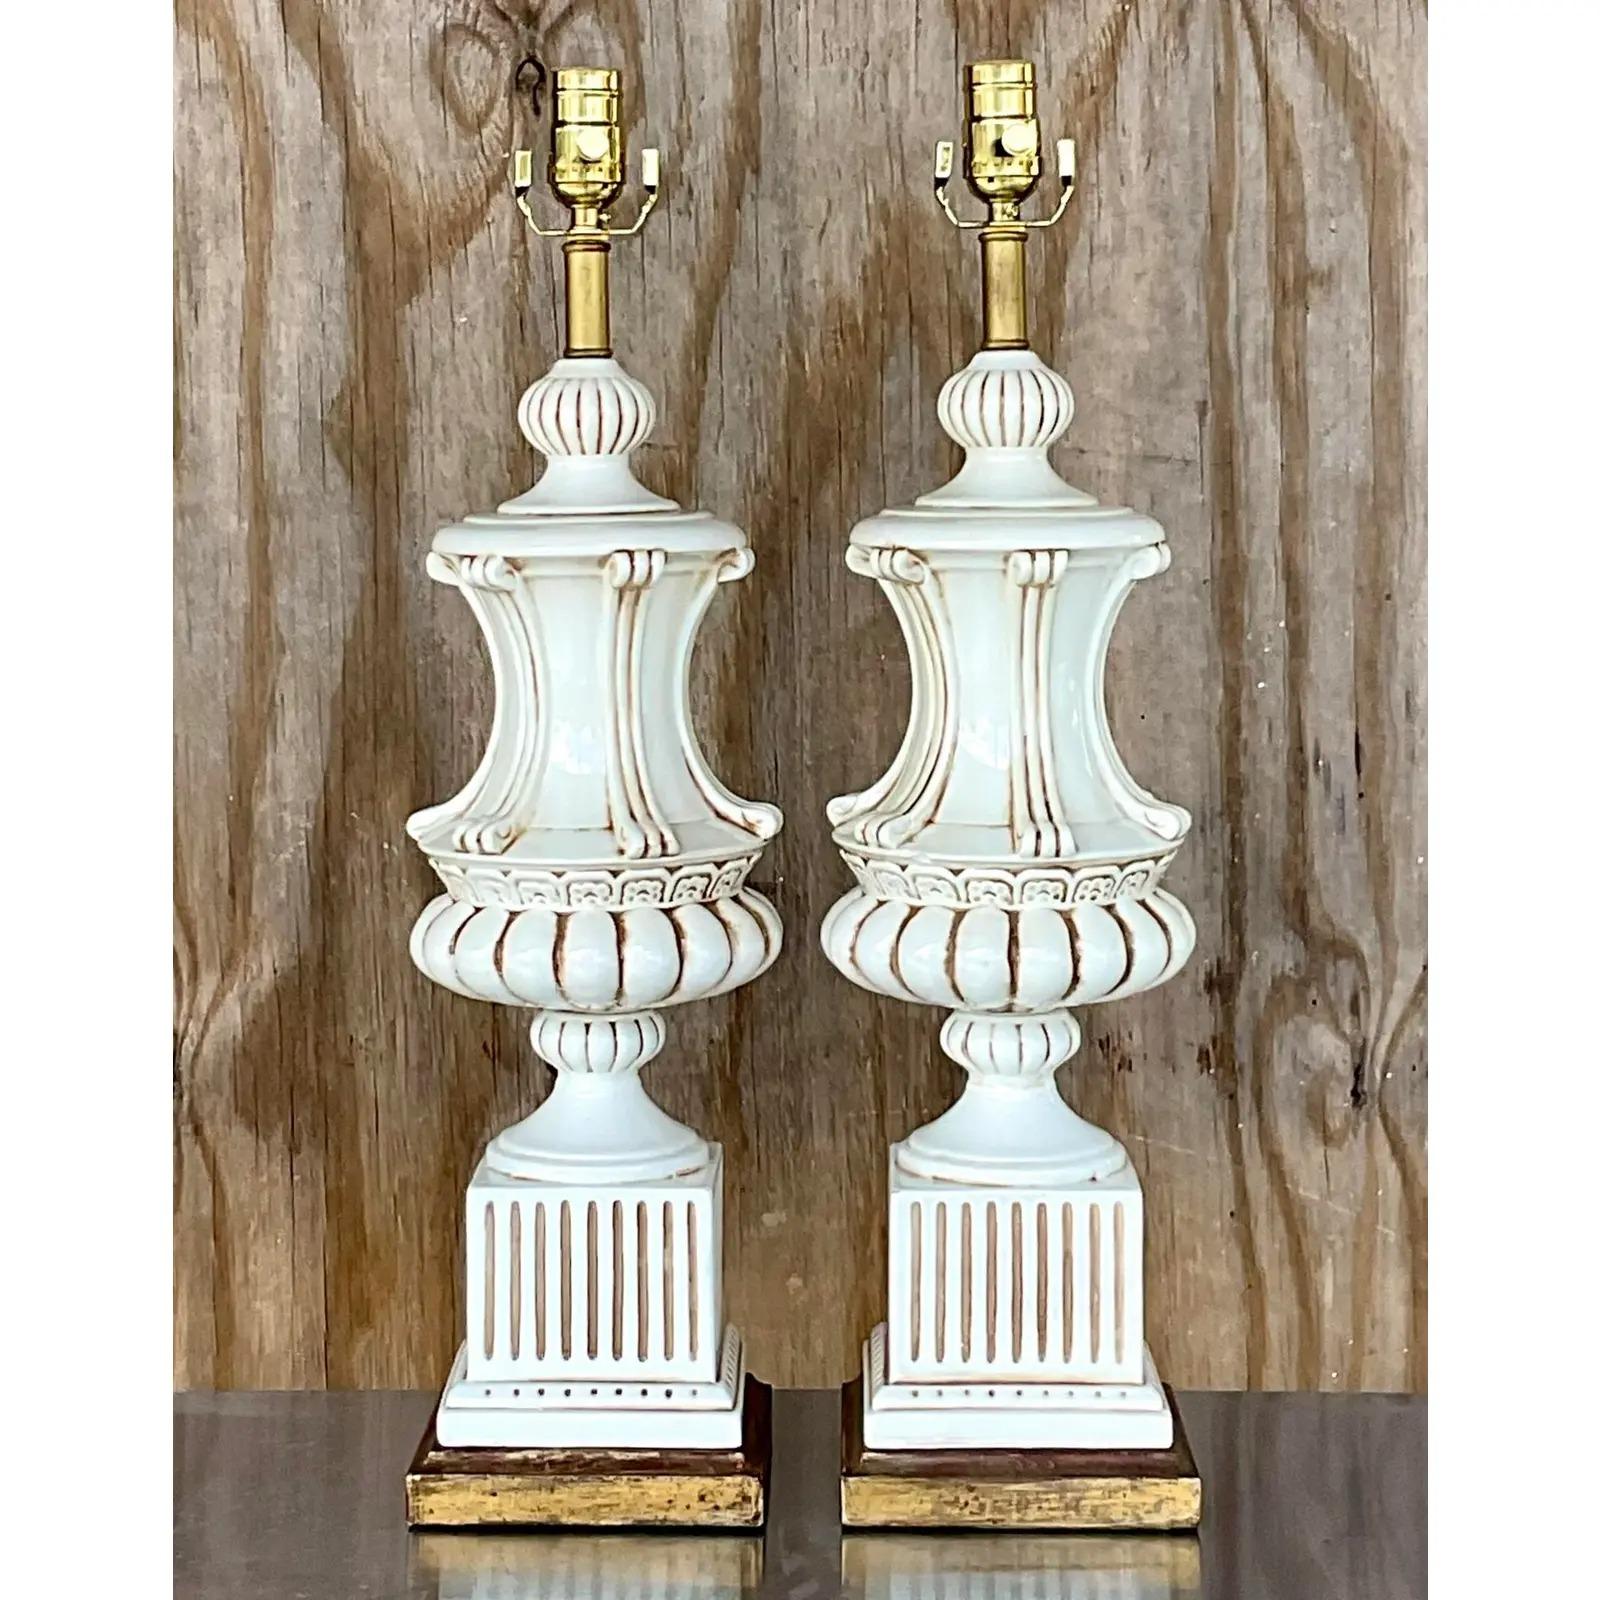 A fantastic pair of glazed ceramic table lamps. Made in Italy. Beautiful classic urn shape that rests on a gilt wood plinth. Fully restored with all new wiring and hardware. Acquired from a Palm Beach estate.